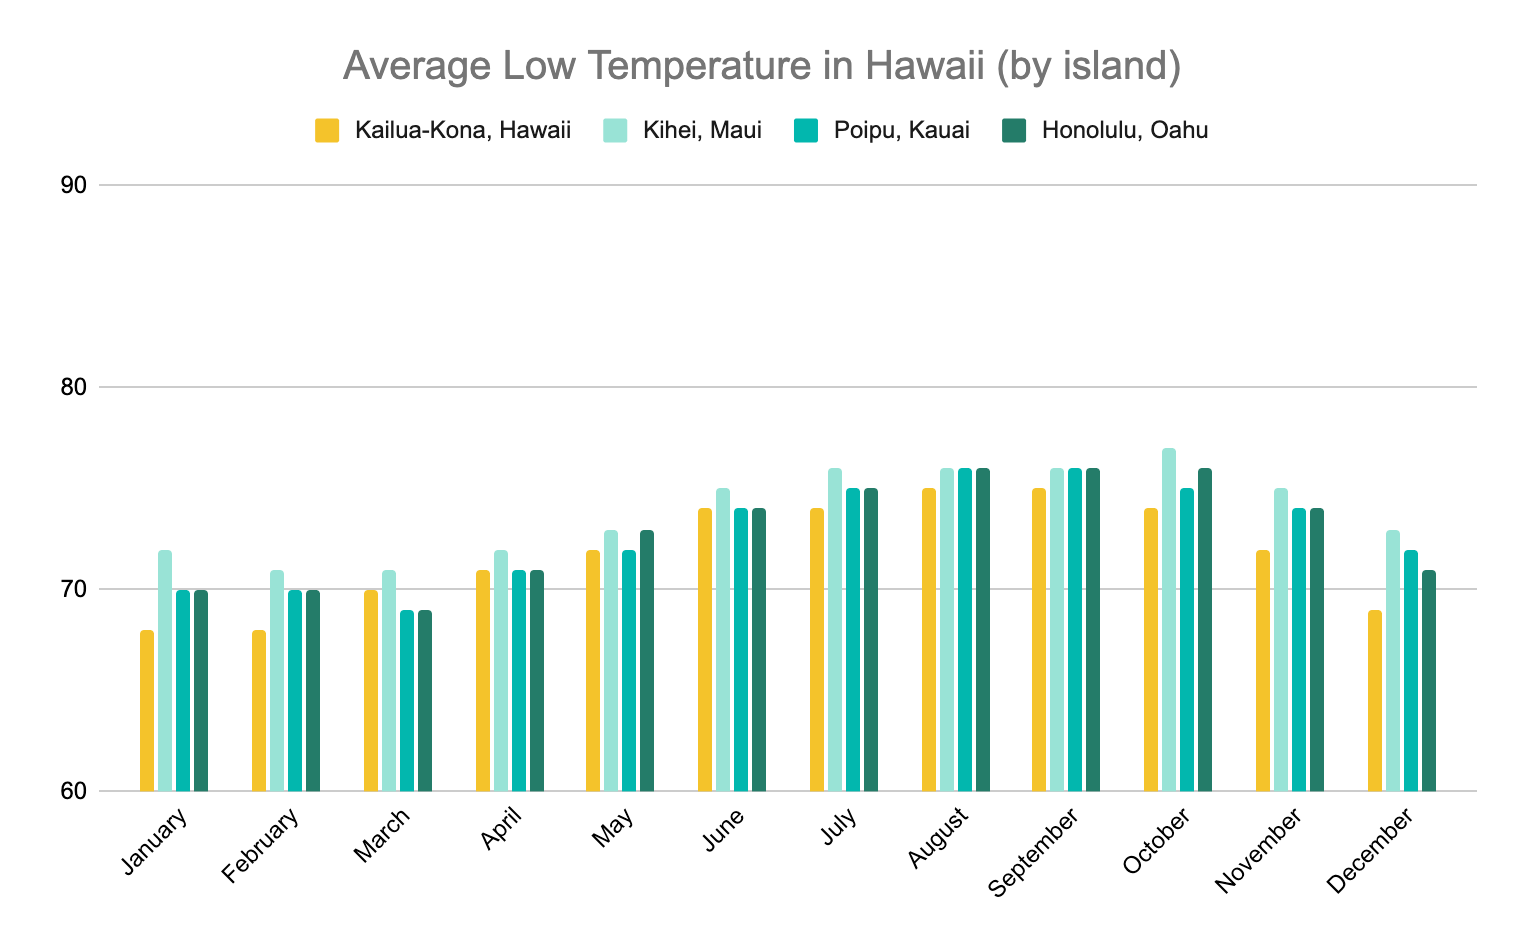 Graph depicting the average low temperatures (Fahrenheit) in Hawaii throughout the year. The Big Island consistently has the lowest temps, and Maui consistently has the highest.